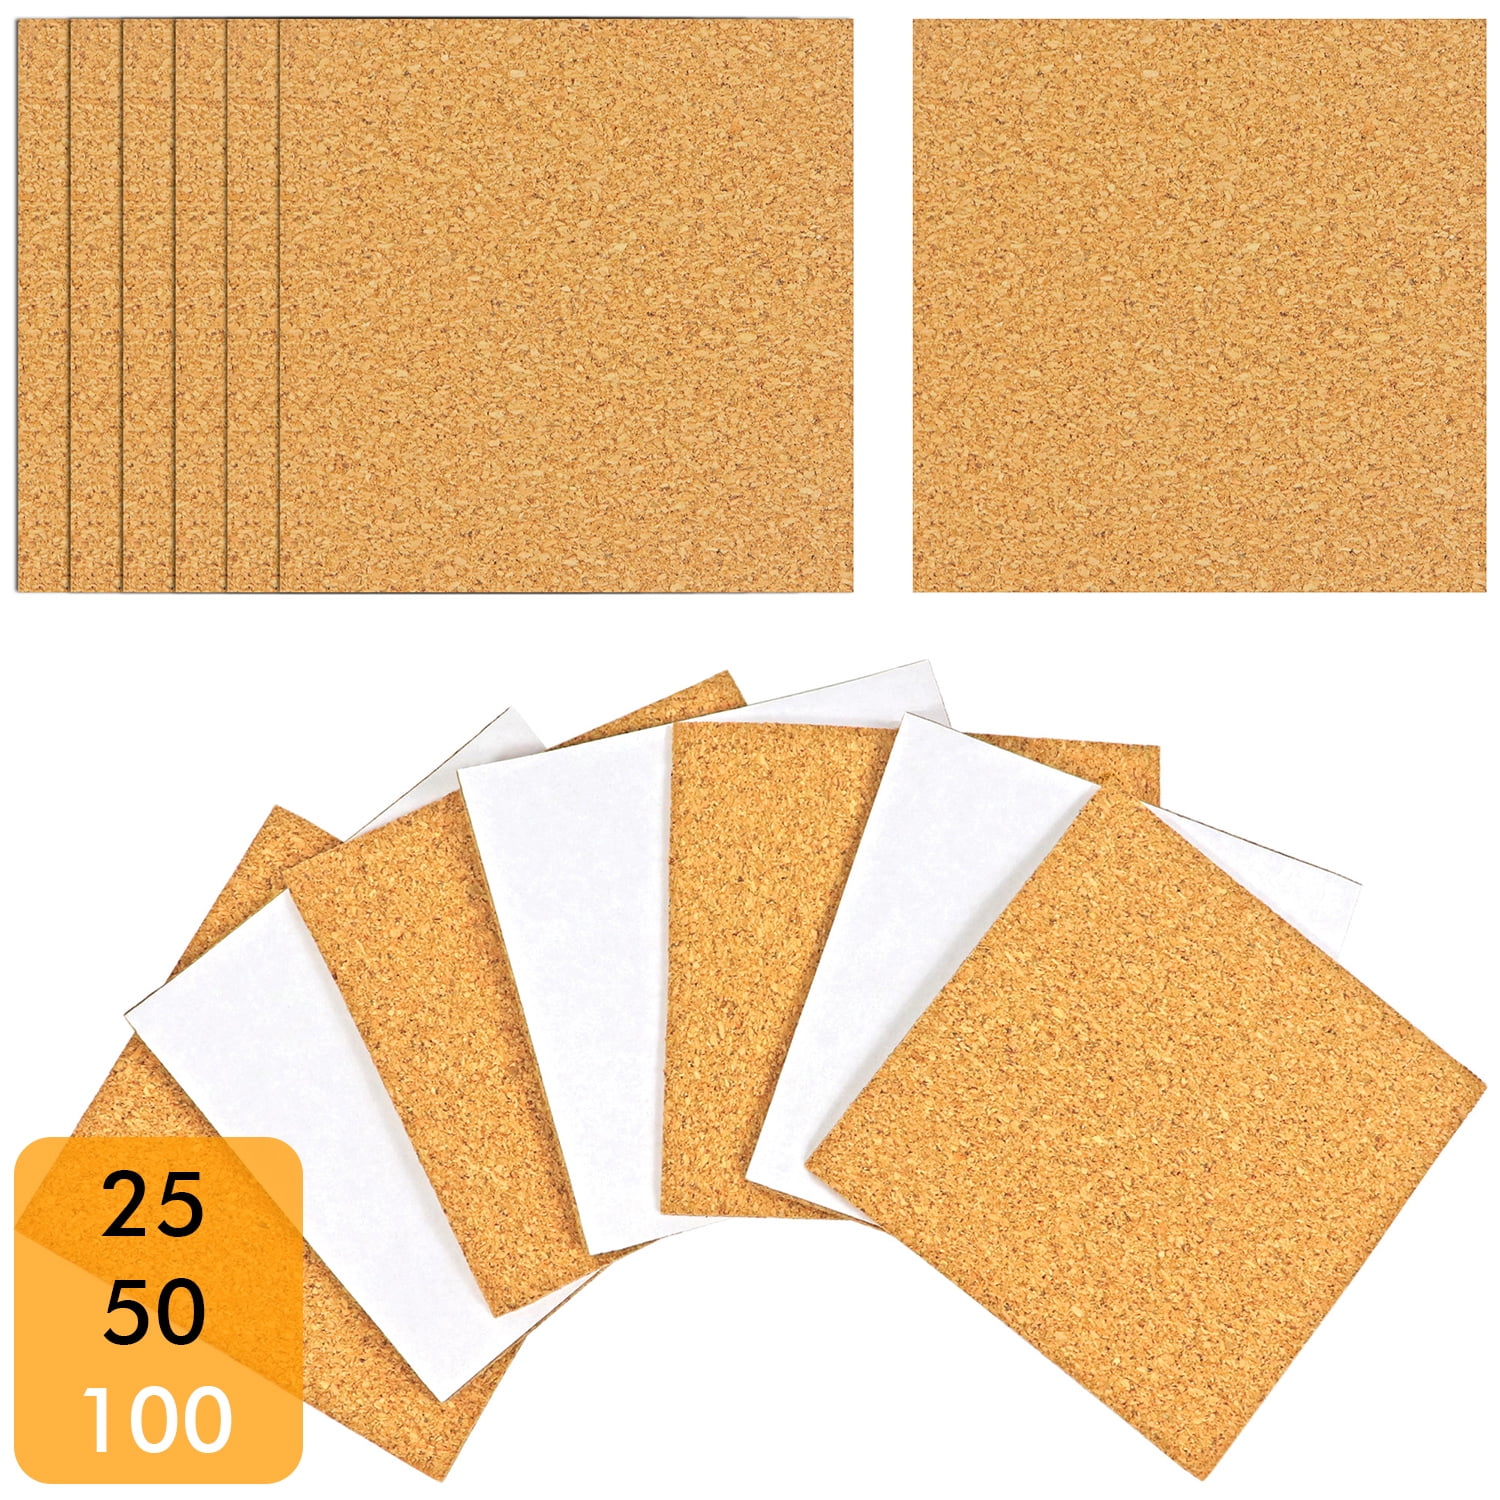 80 4 X 4 Adhesive Backed Cork for Coasters Adhesive Cork Cork Sheets Cork  Backing Cork for Coasters Cork Squares 